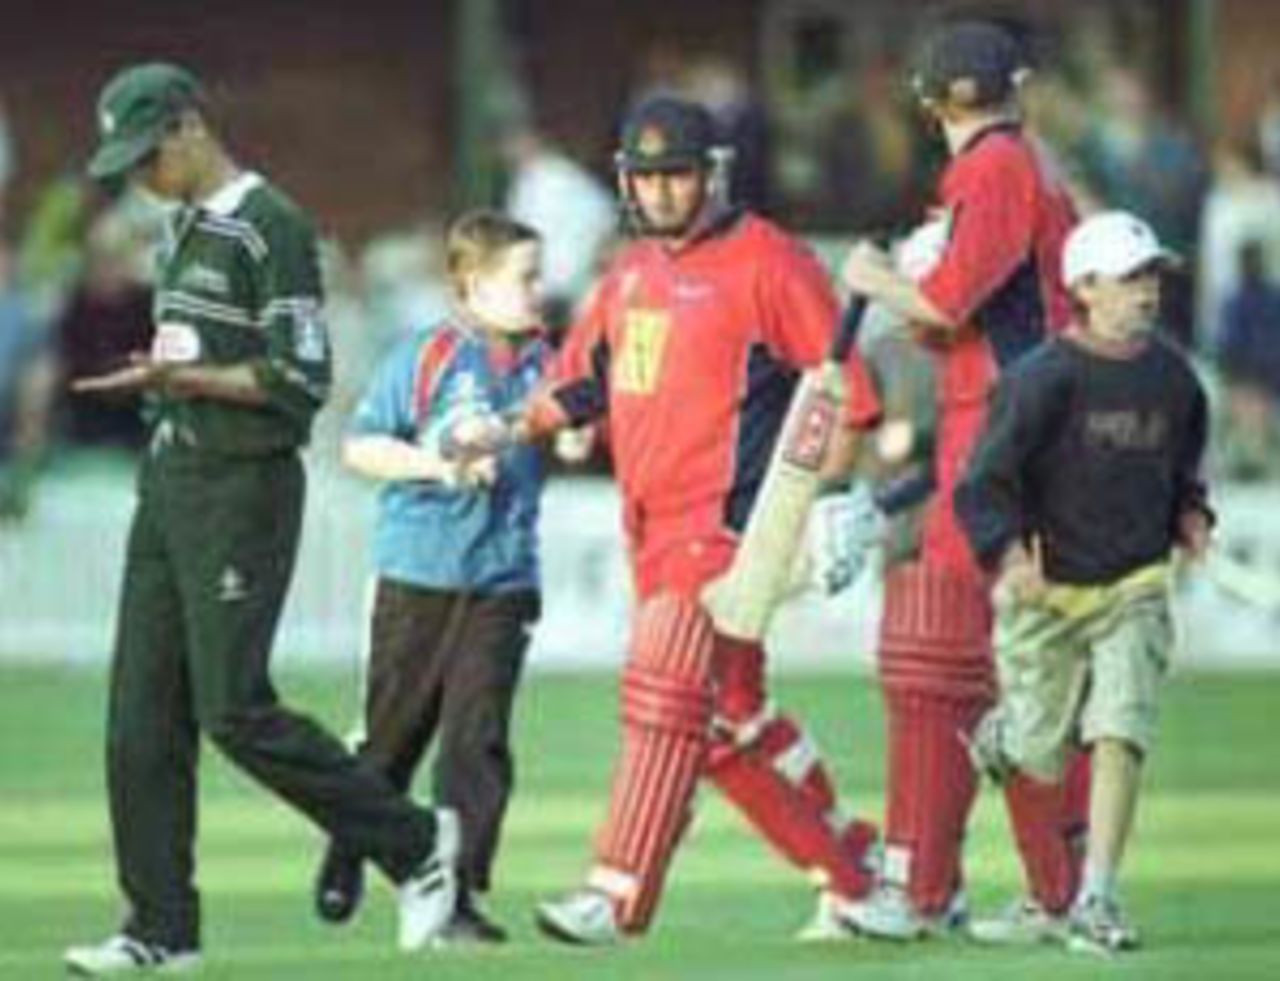 Ian Austin walks back to the pavilion after hitting the winning runs, National League Division One, 2000, Worcestershire v Lancashire, County Ground, New Road, Worcester, 3 September 2000.